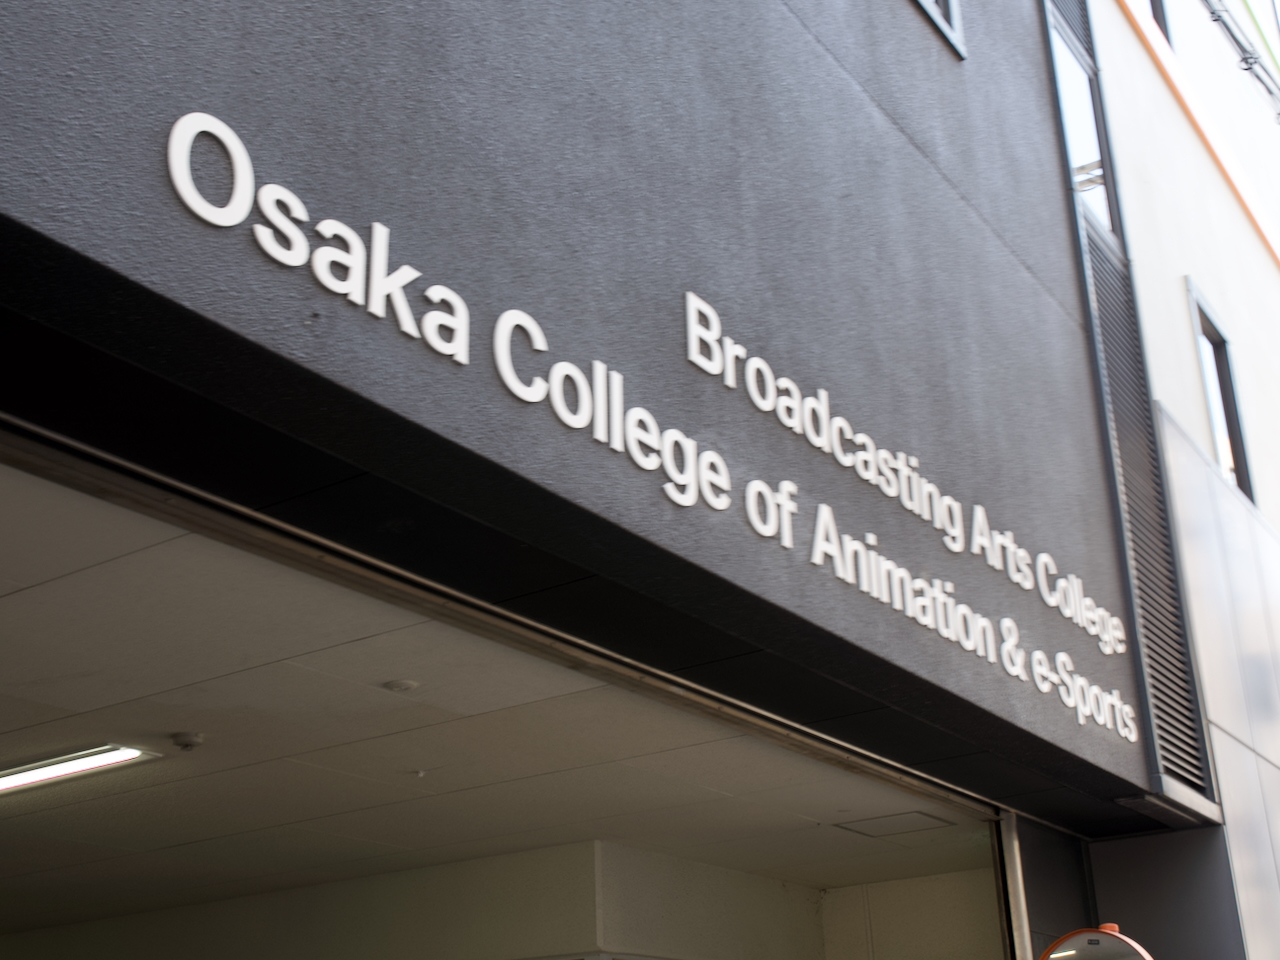 English sign for the Osaka College of Anime & eSports